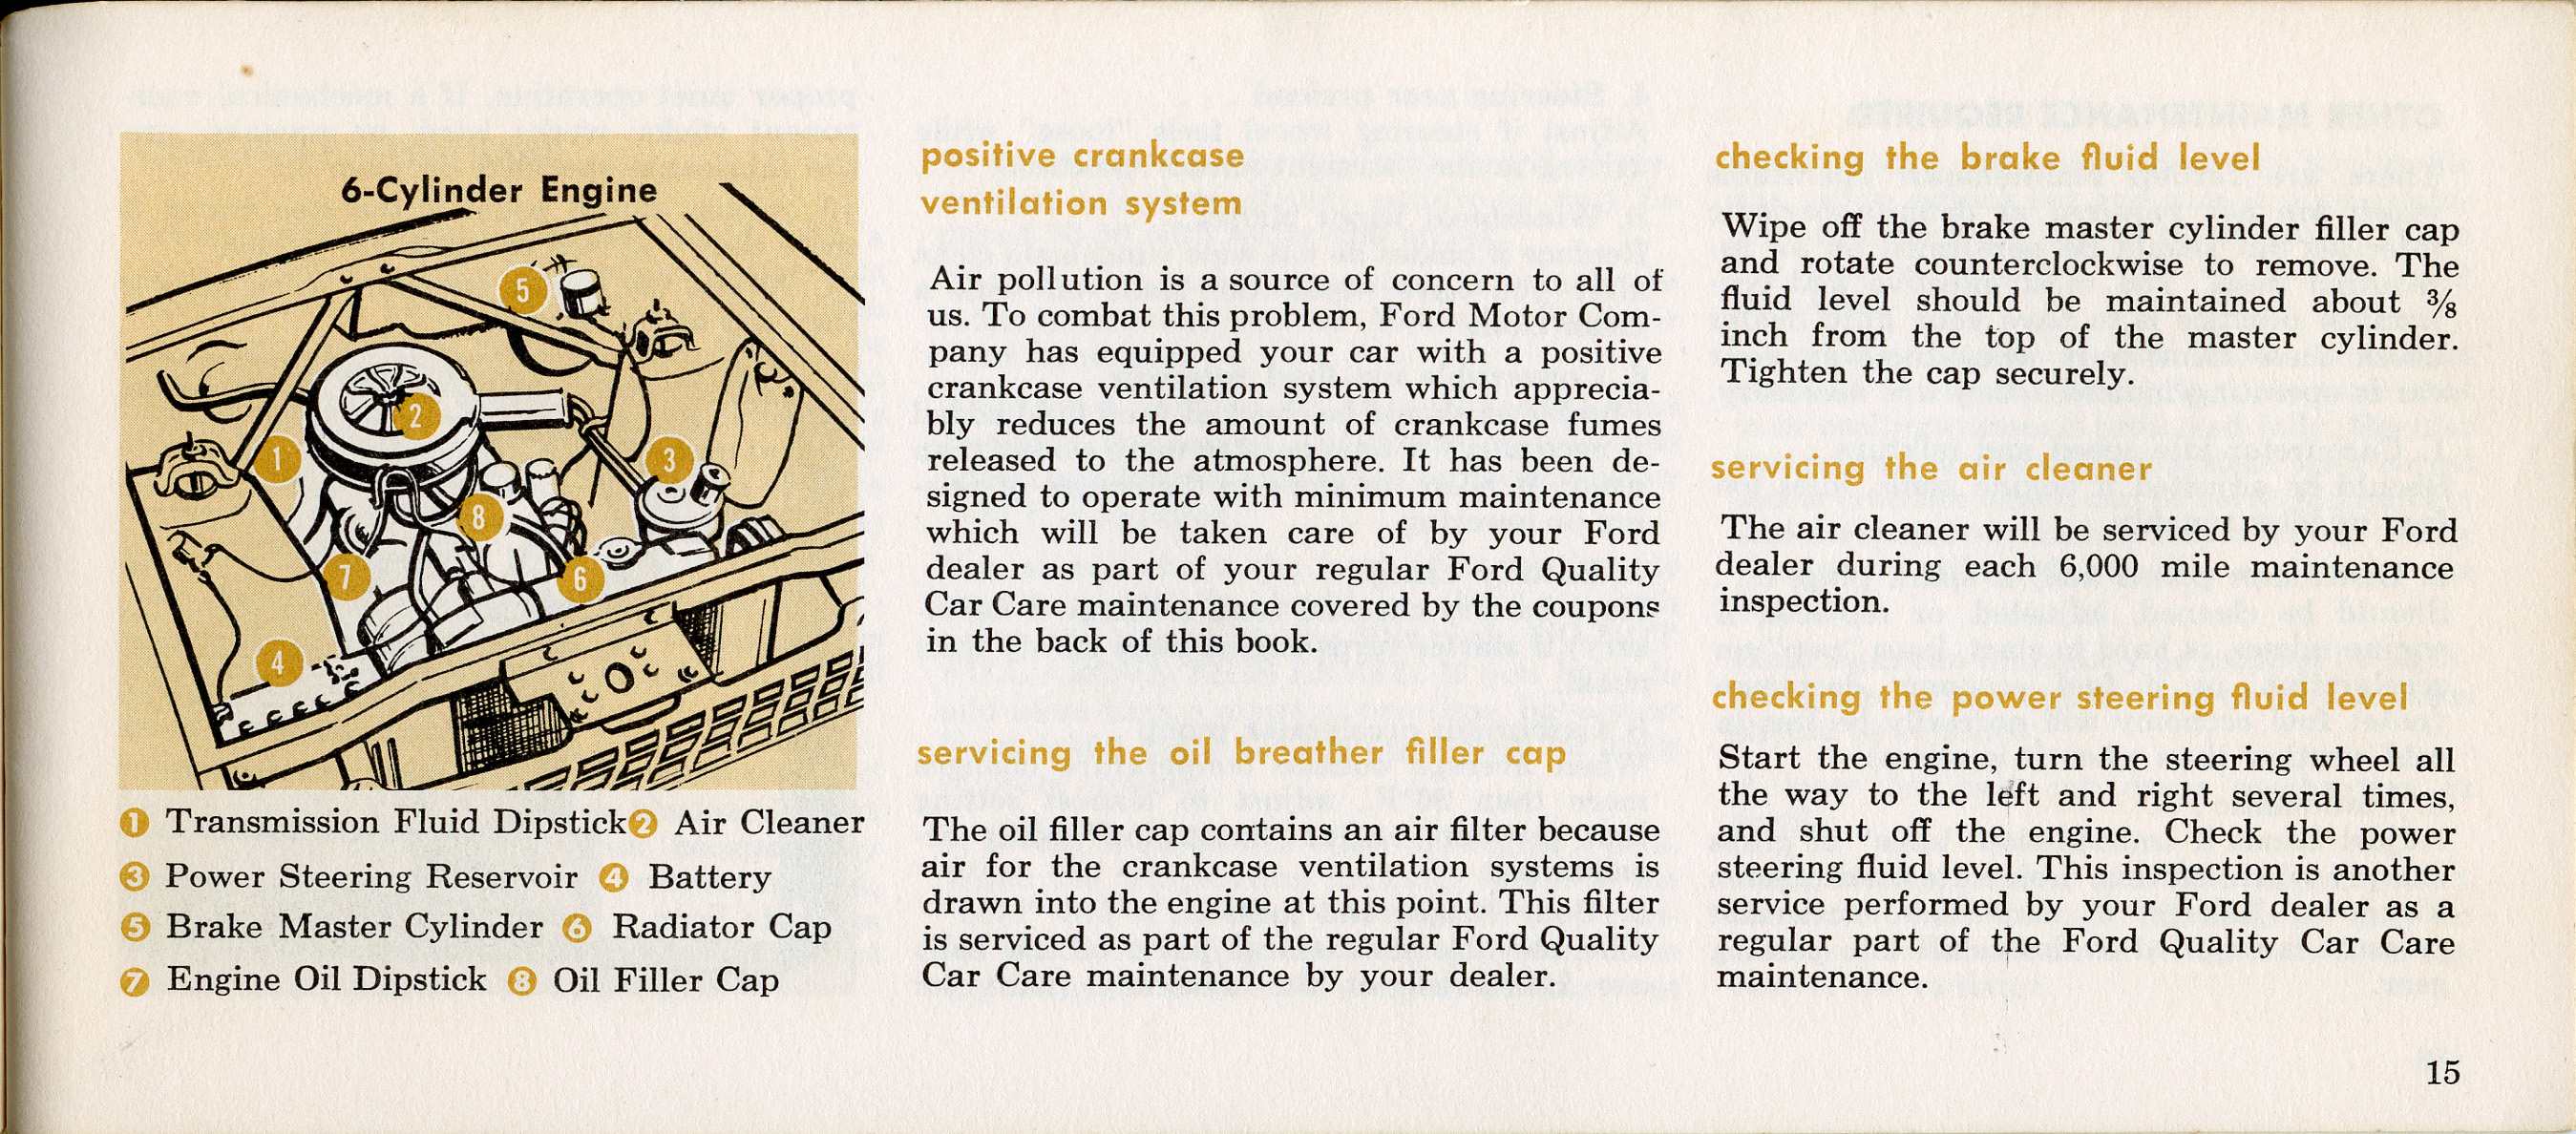 1964 Ford Falcon Owners Manual Page 24